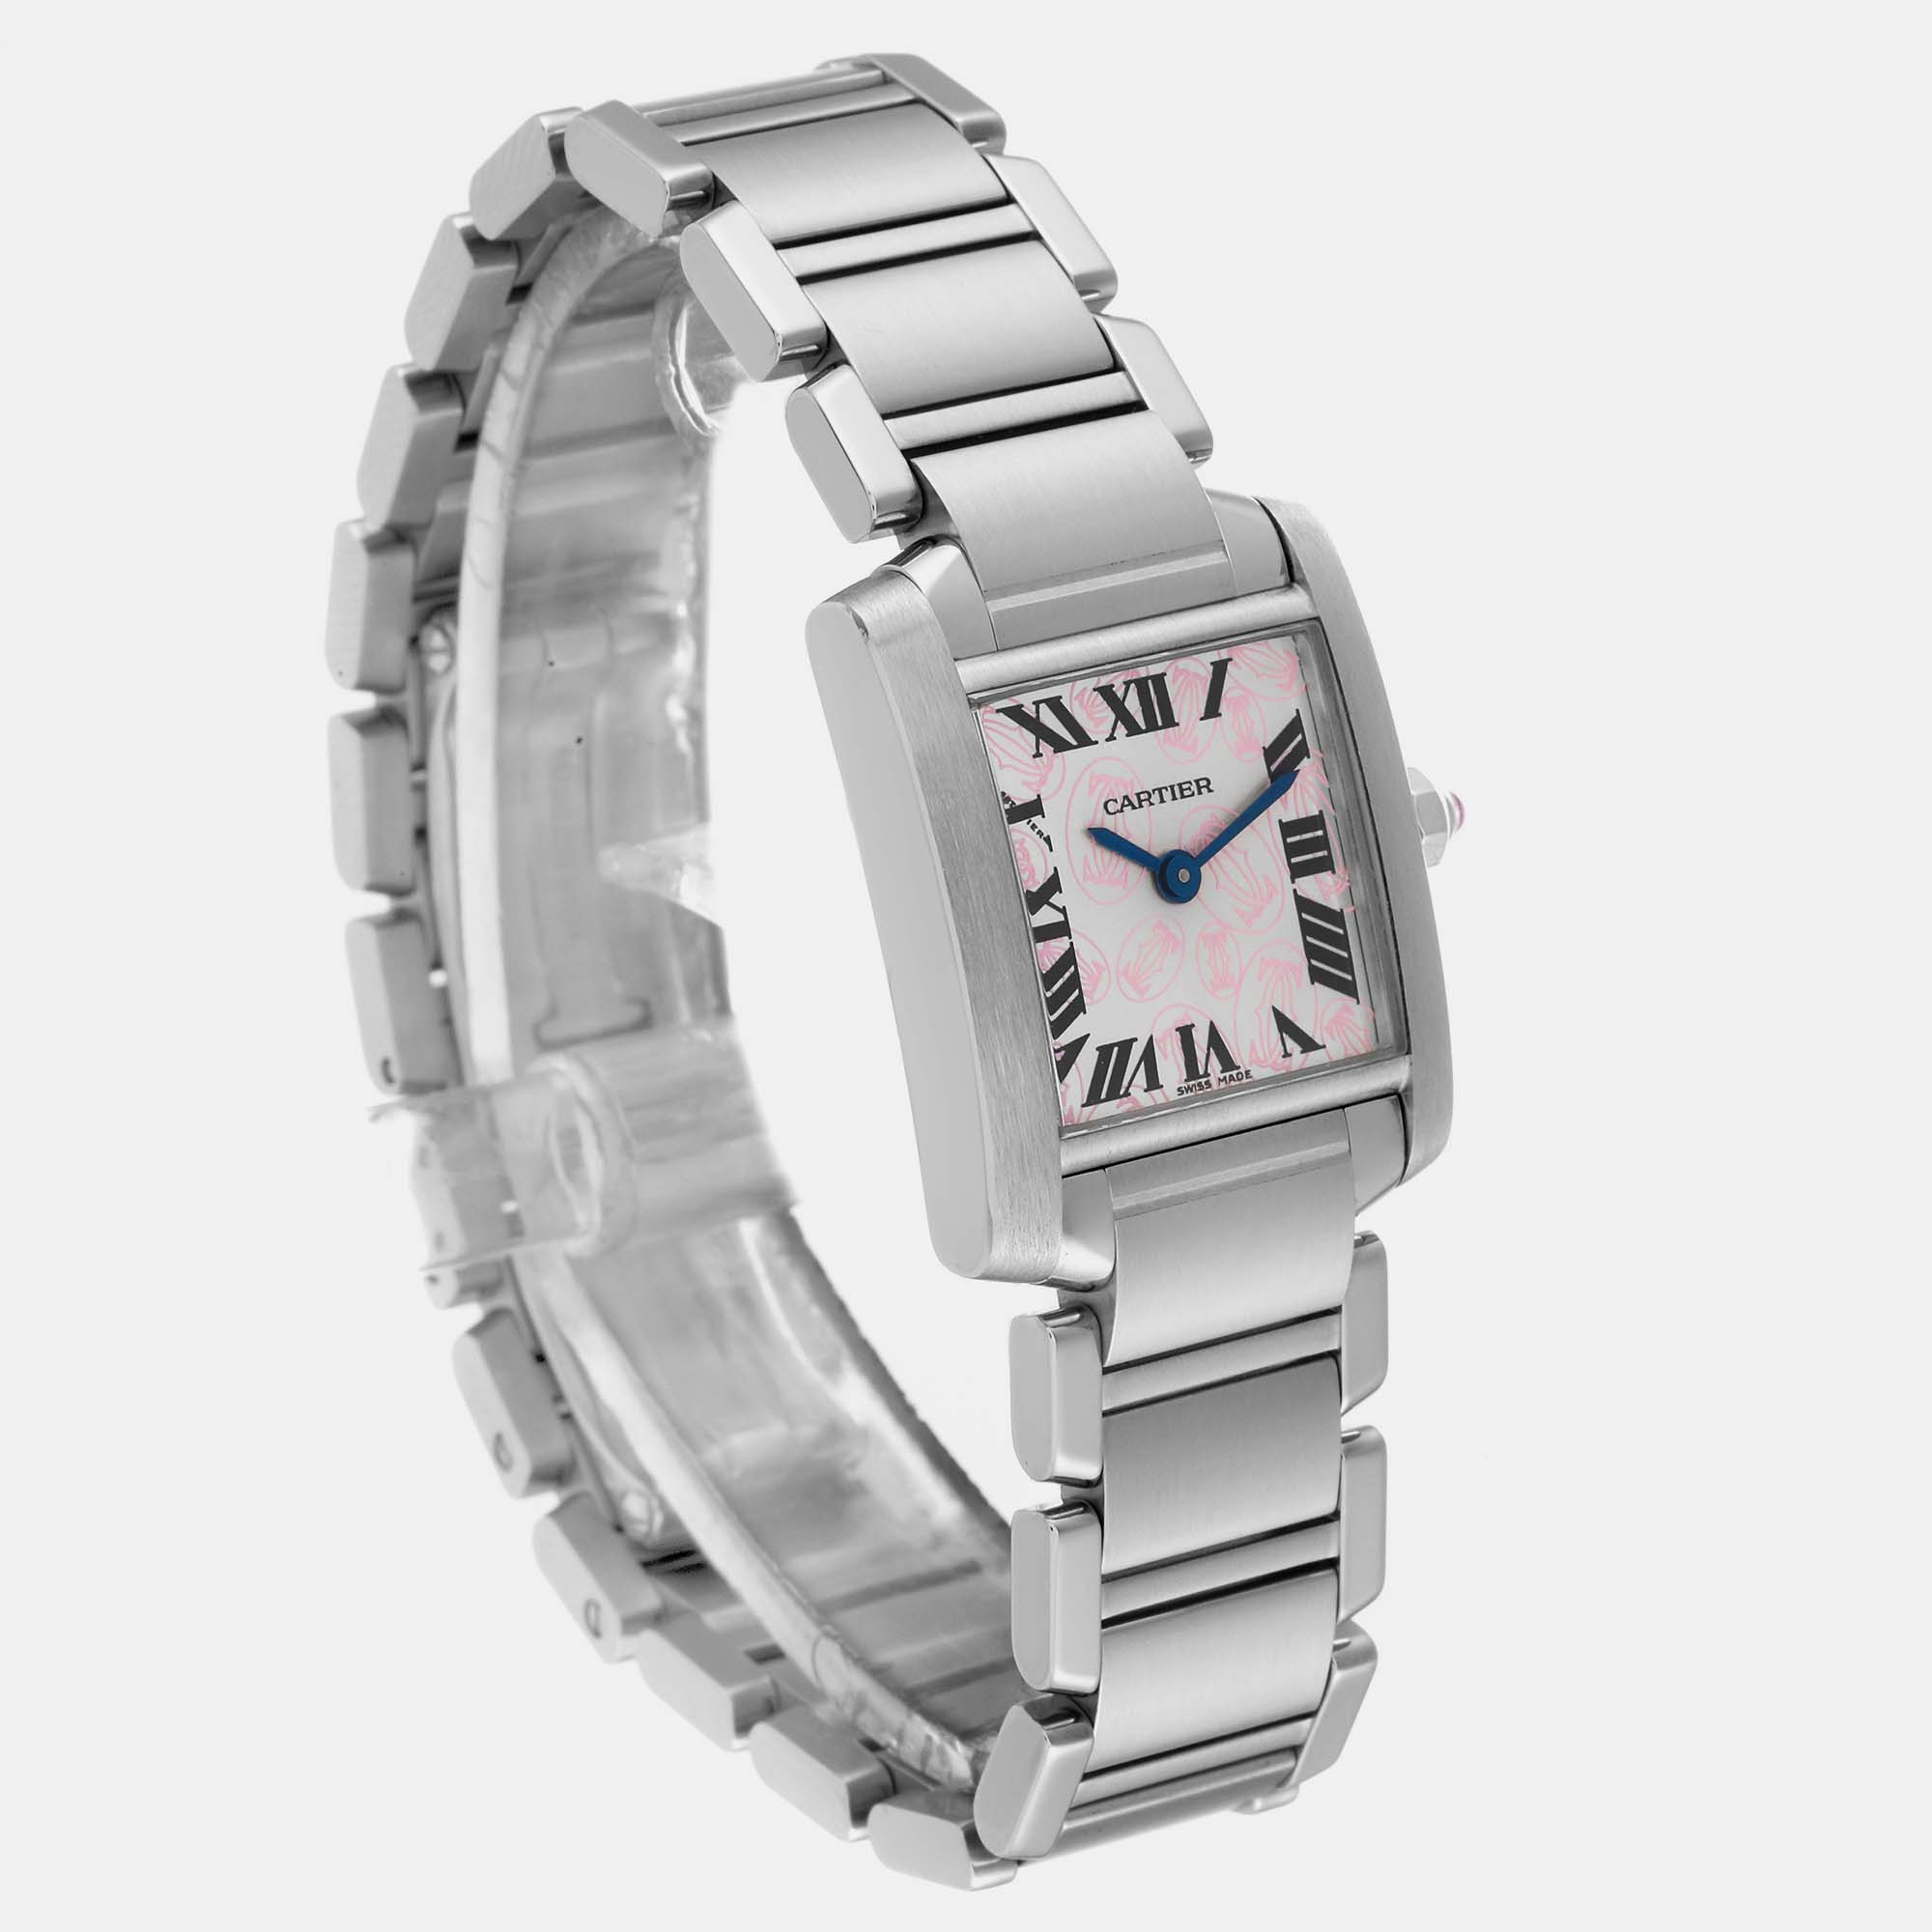 Cartier Tank Francaise Pink Double C Decor Limited Edition Steel Ladies Watch W51031Q3 20 X 25 Mm